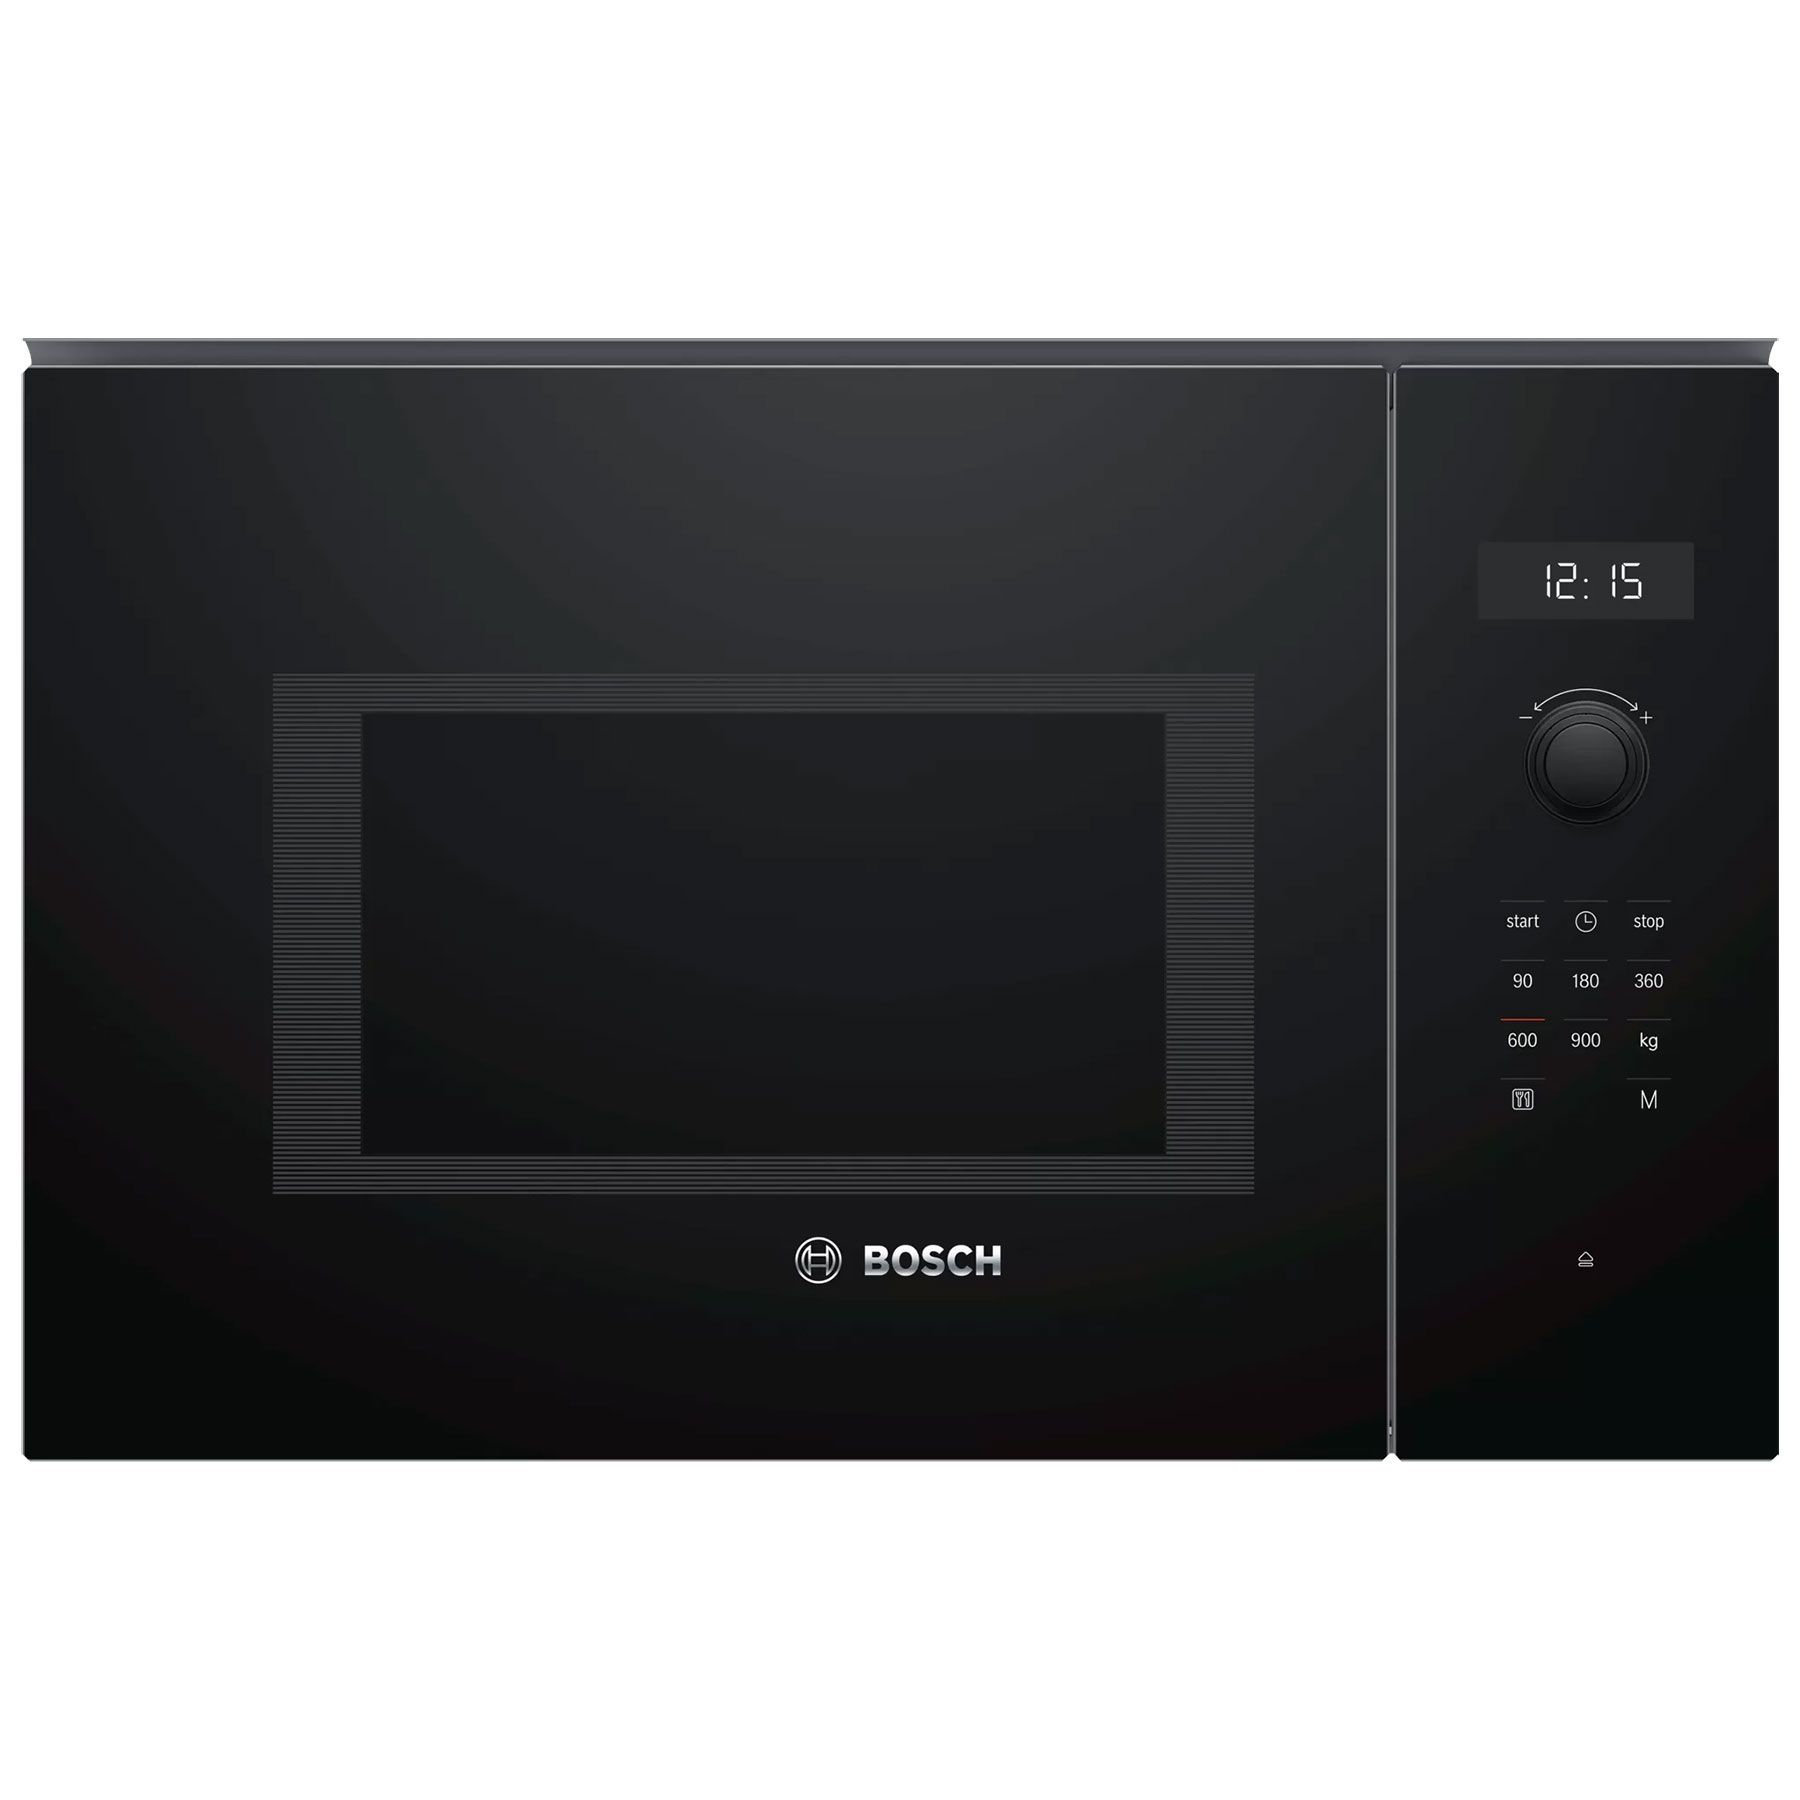 Image of Bosch BFL554MB0B Series 6 Built in Microwave Oven in Black 900W 25 Lit